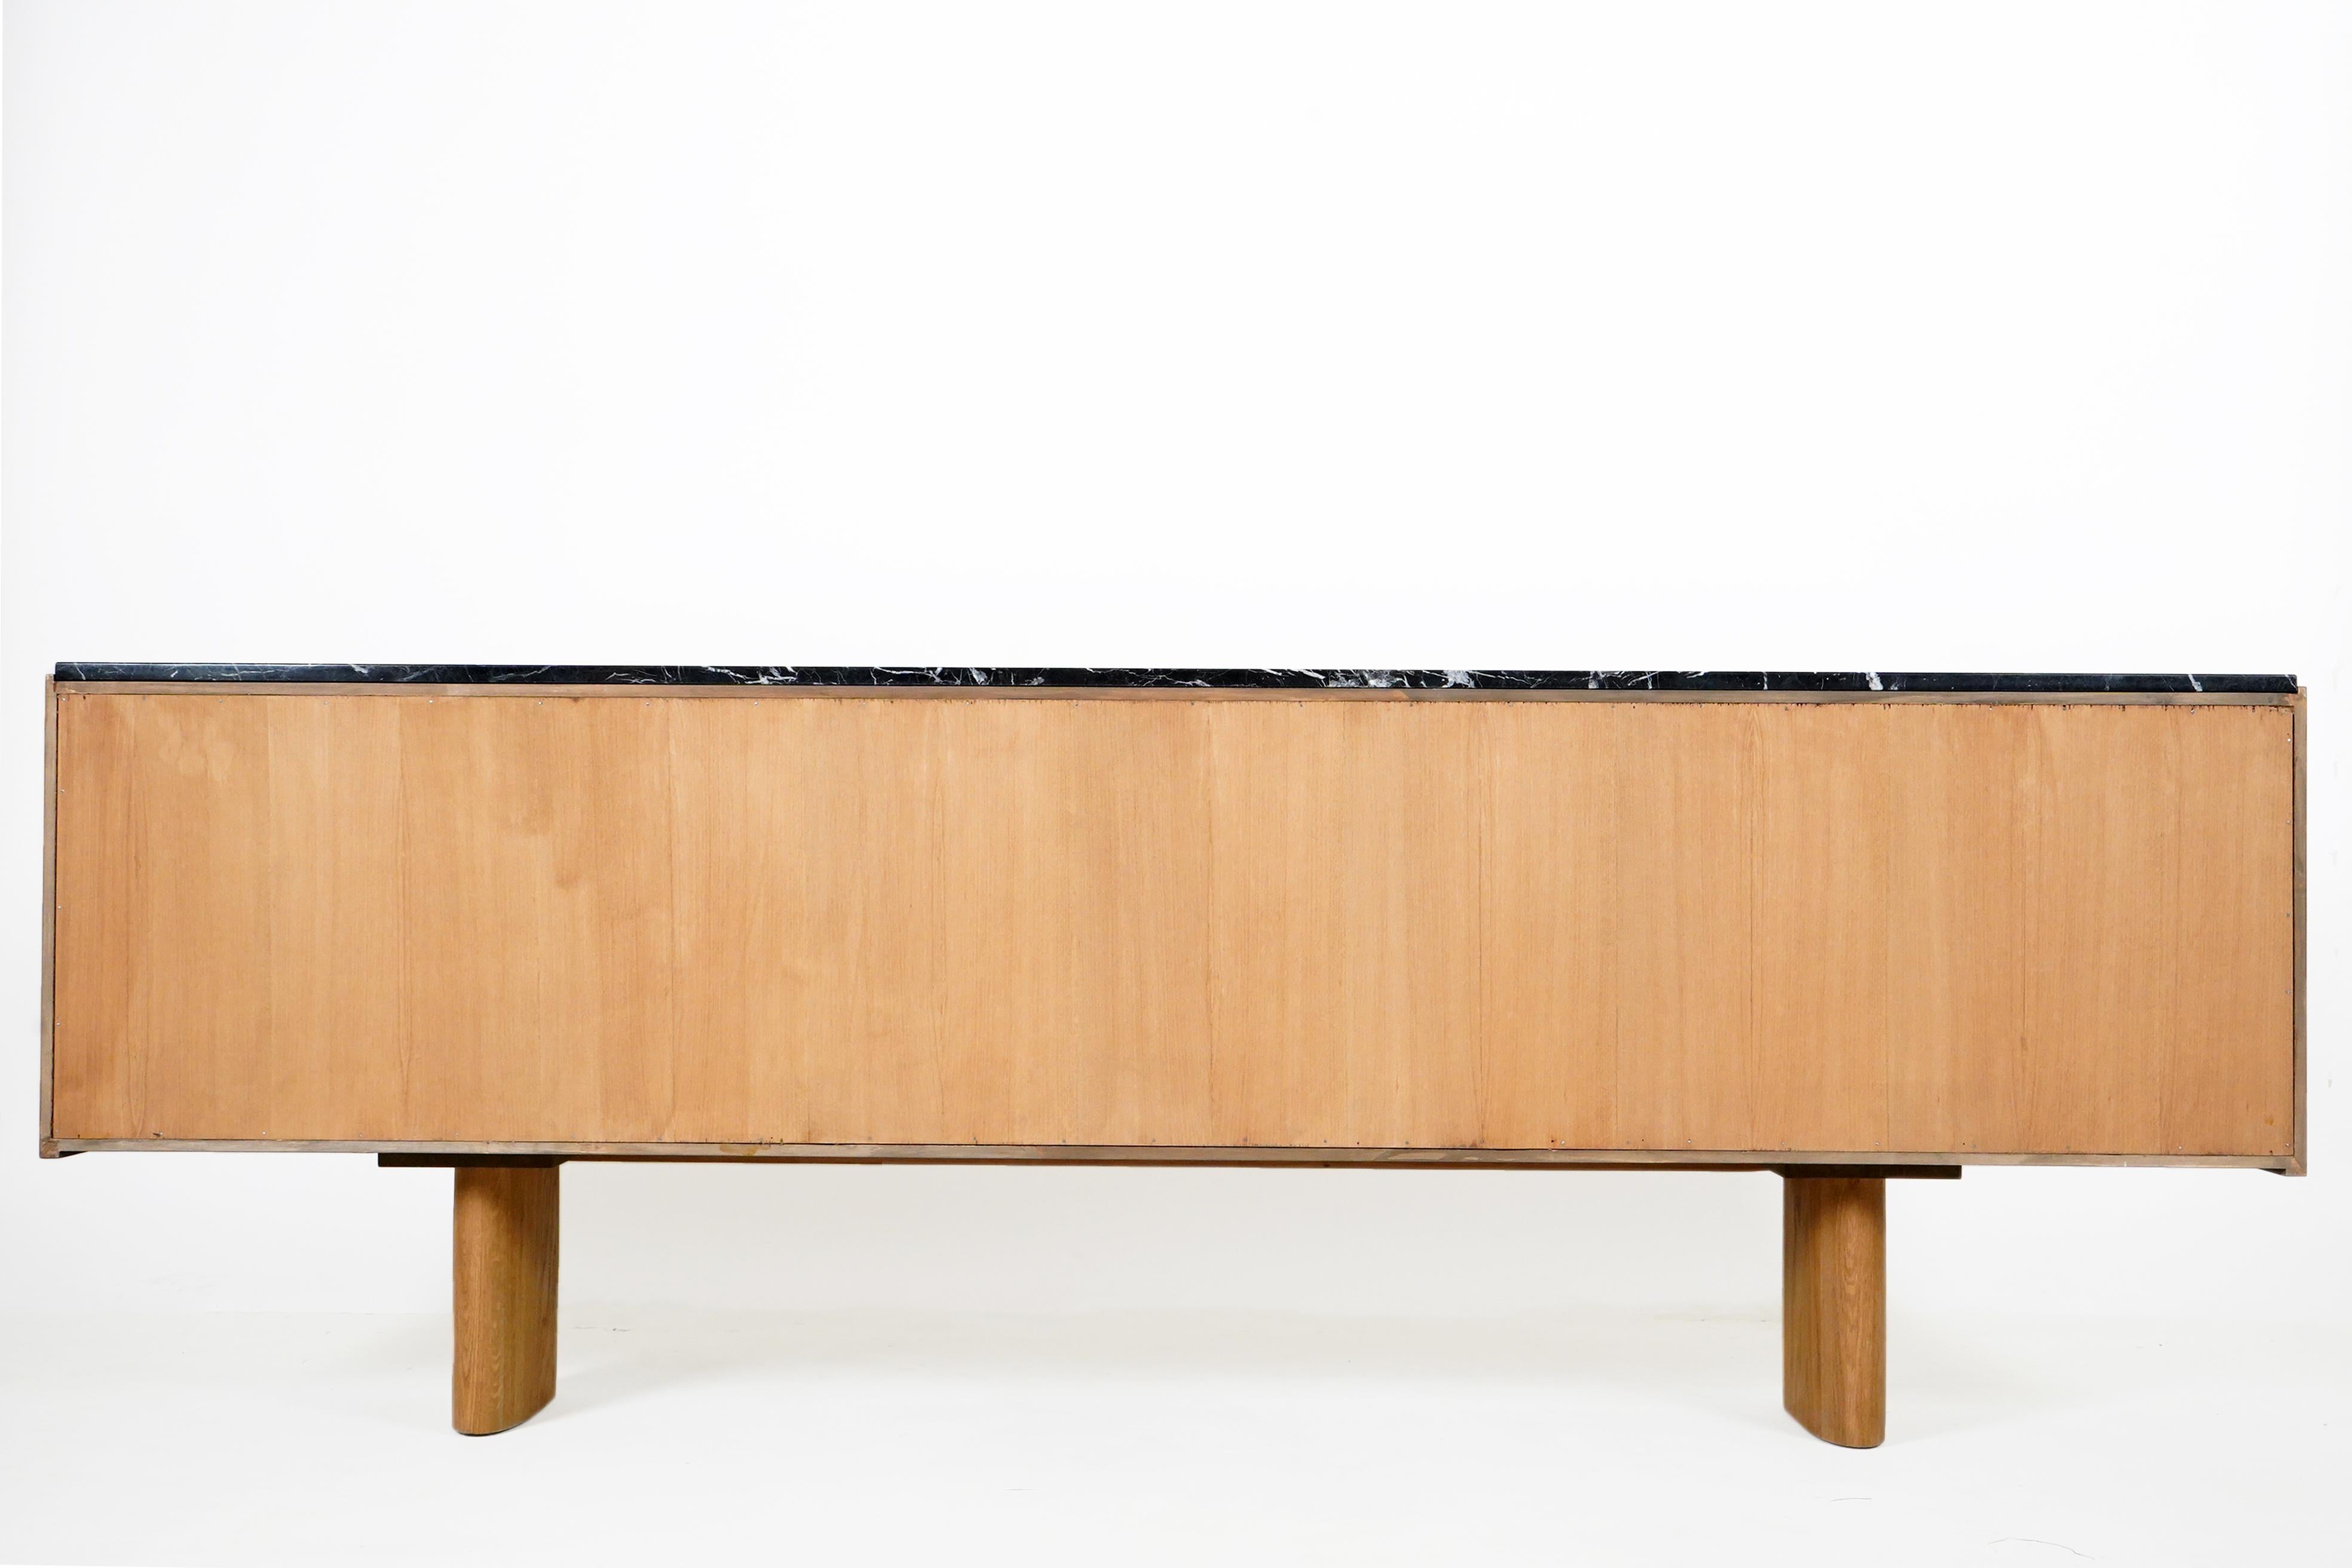 Contemporary Mid-Century Modern Oak Sideboard with 2 Sliding Doors and 3 Drawers For Sale